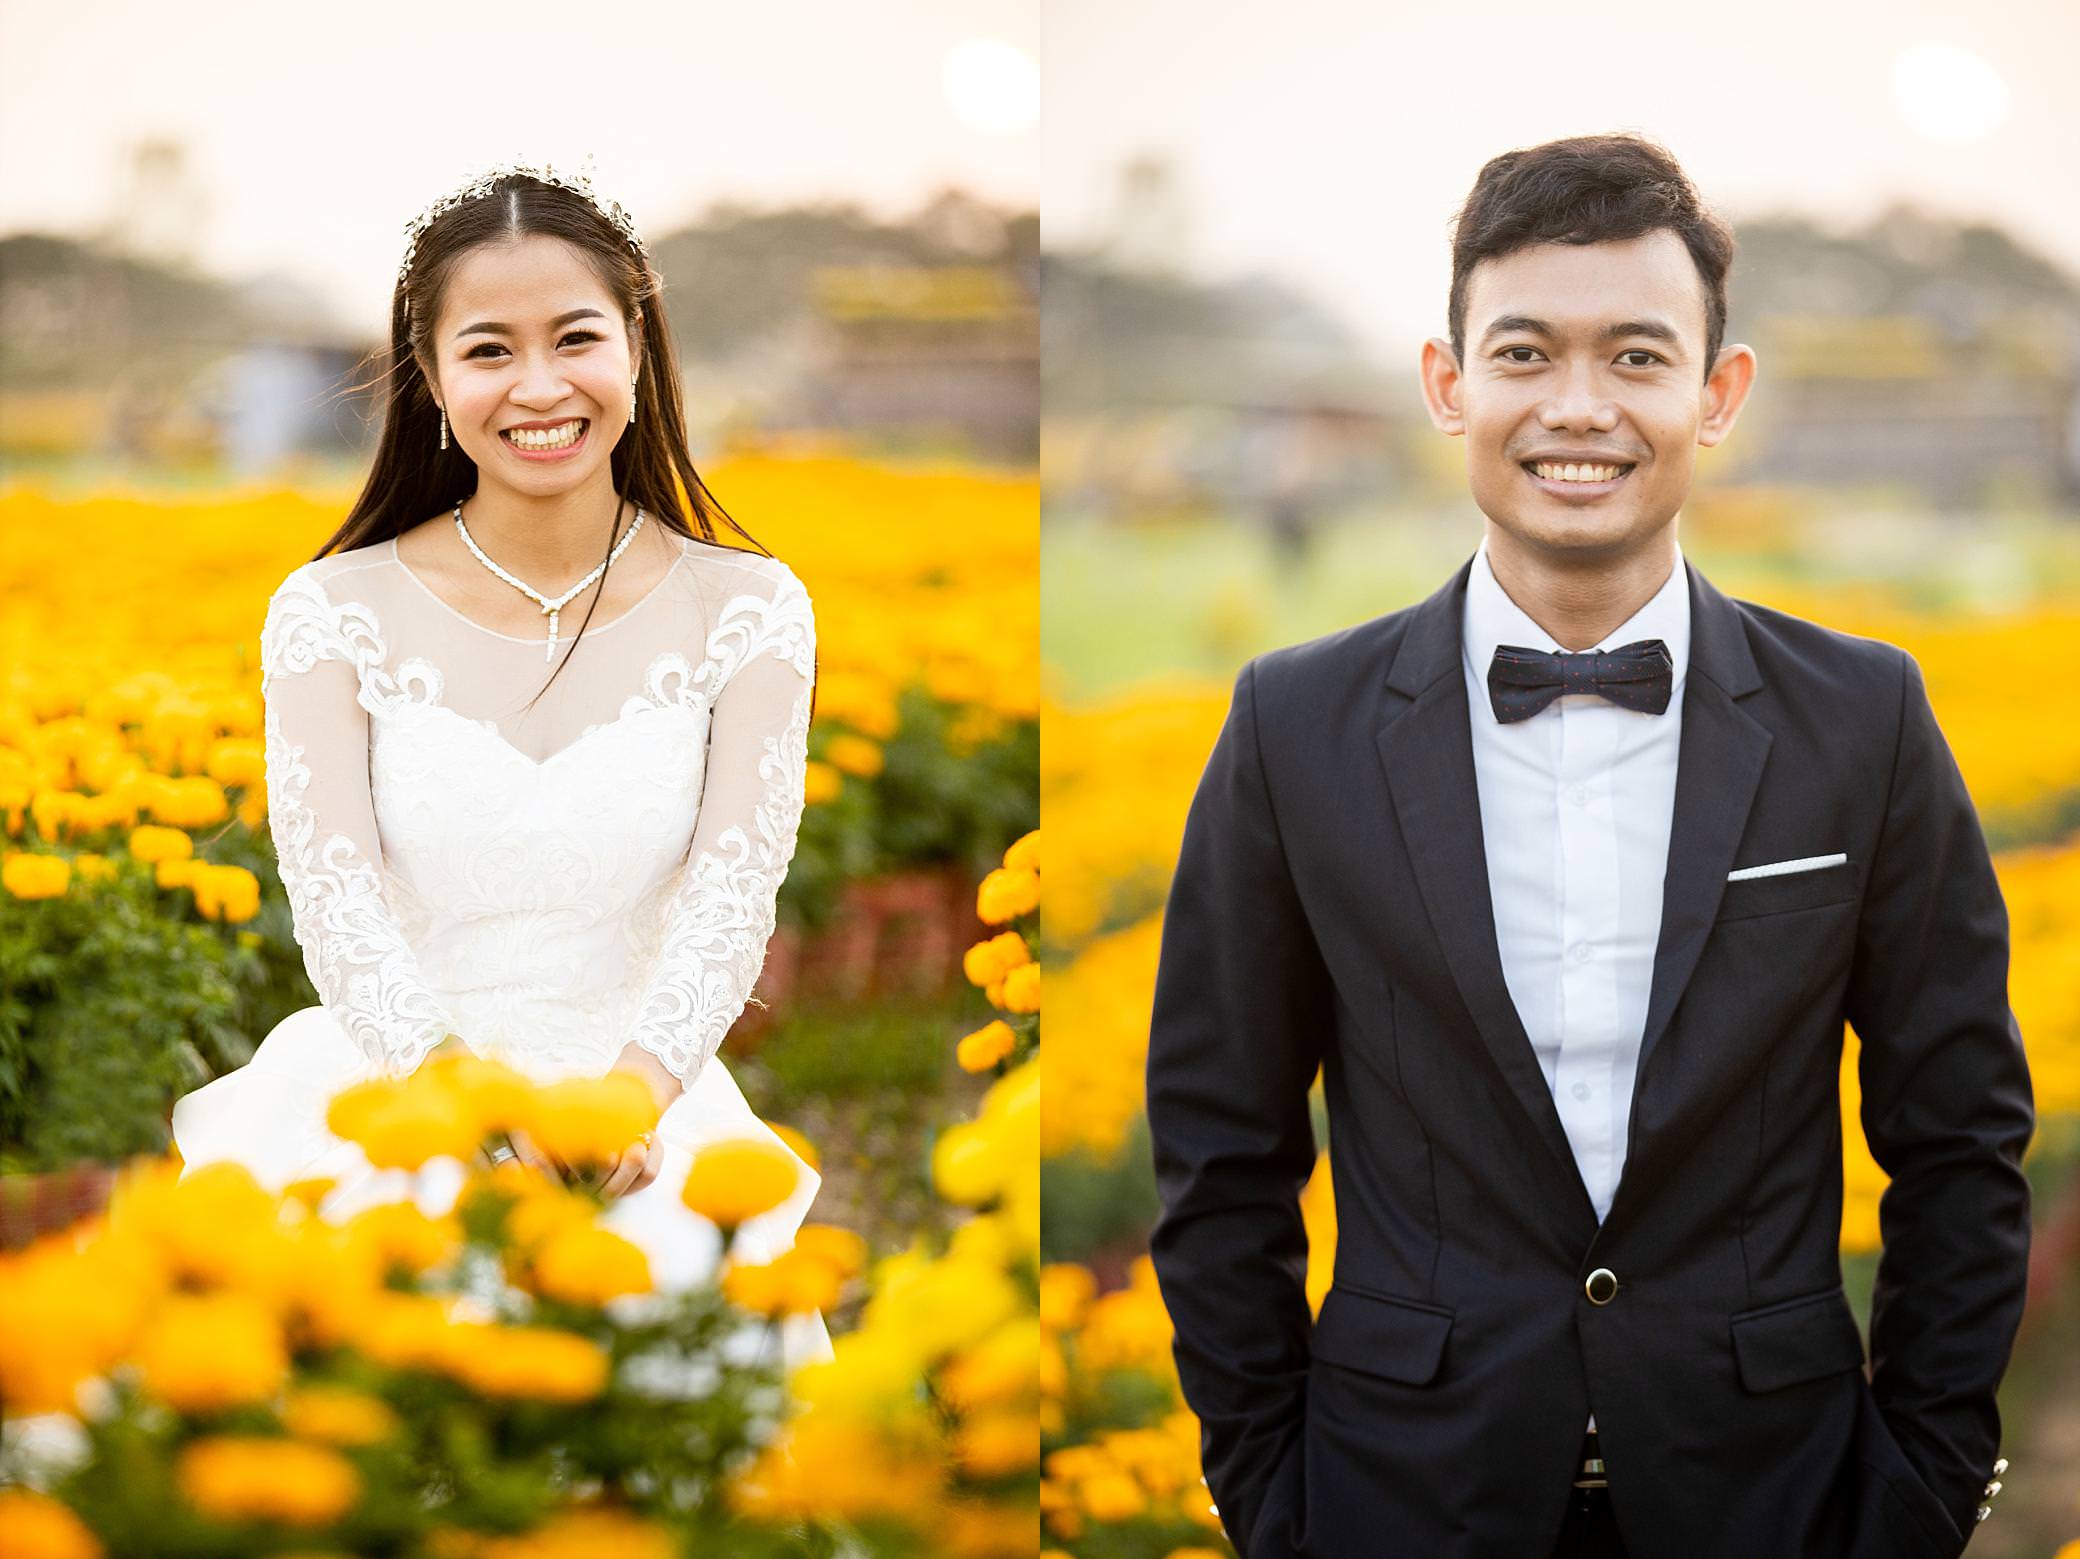 individual bridal portraits in a field of yellow flowers